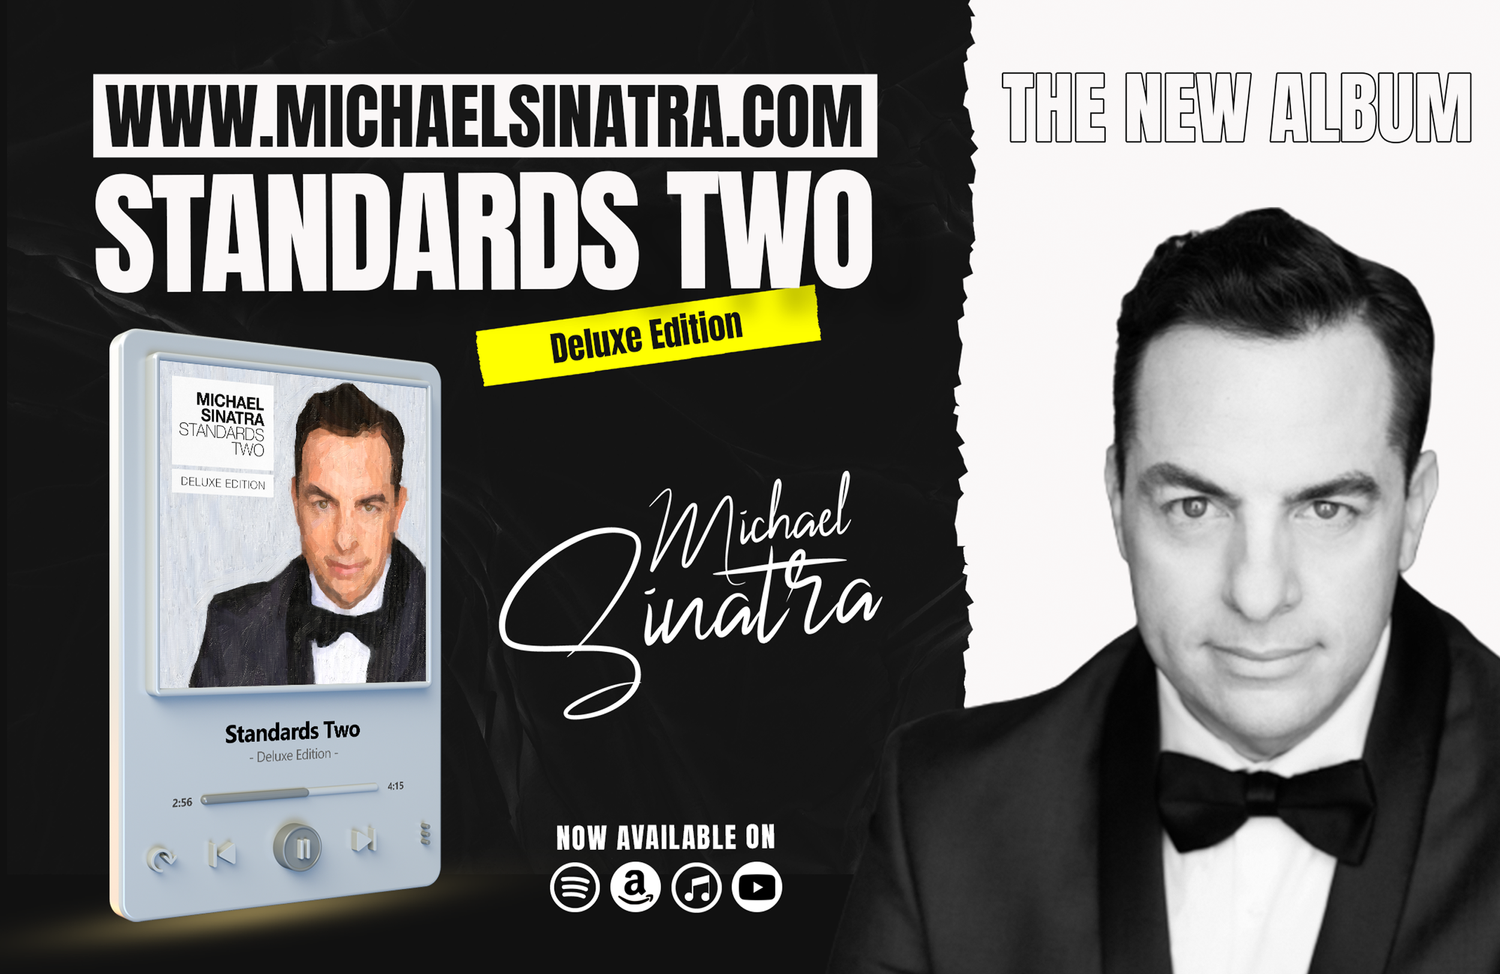 Michael Sinatra - Official Site | Frank Sinatra Tribute | Show Booking Info & Music News